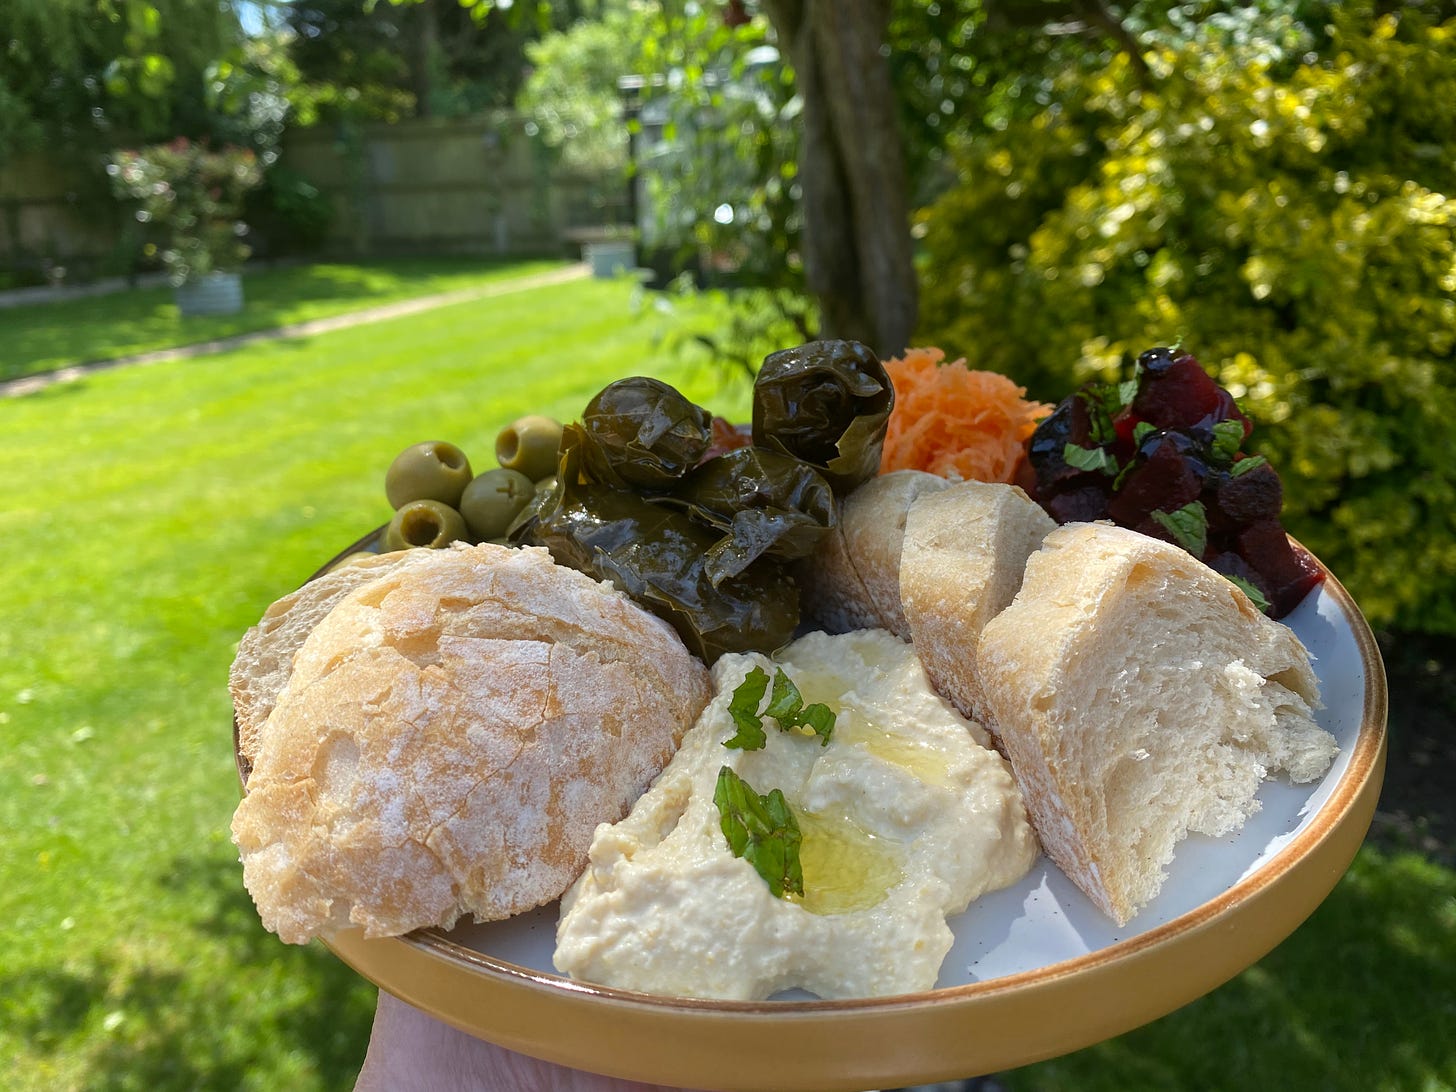 Platter of bread, houmous, vine leaves, carrot, beetroot and olives. Plate held up in the garden, trees and shrubs behind, next to a lawn.